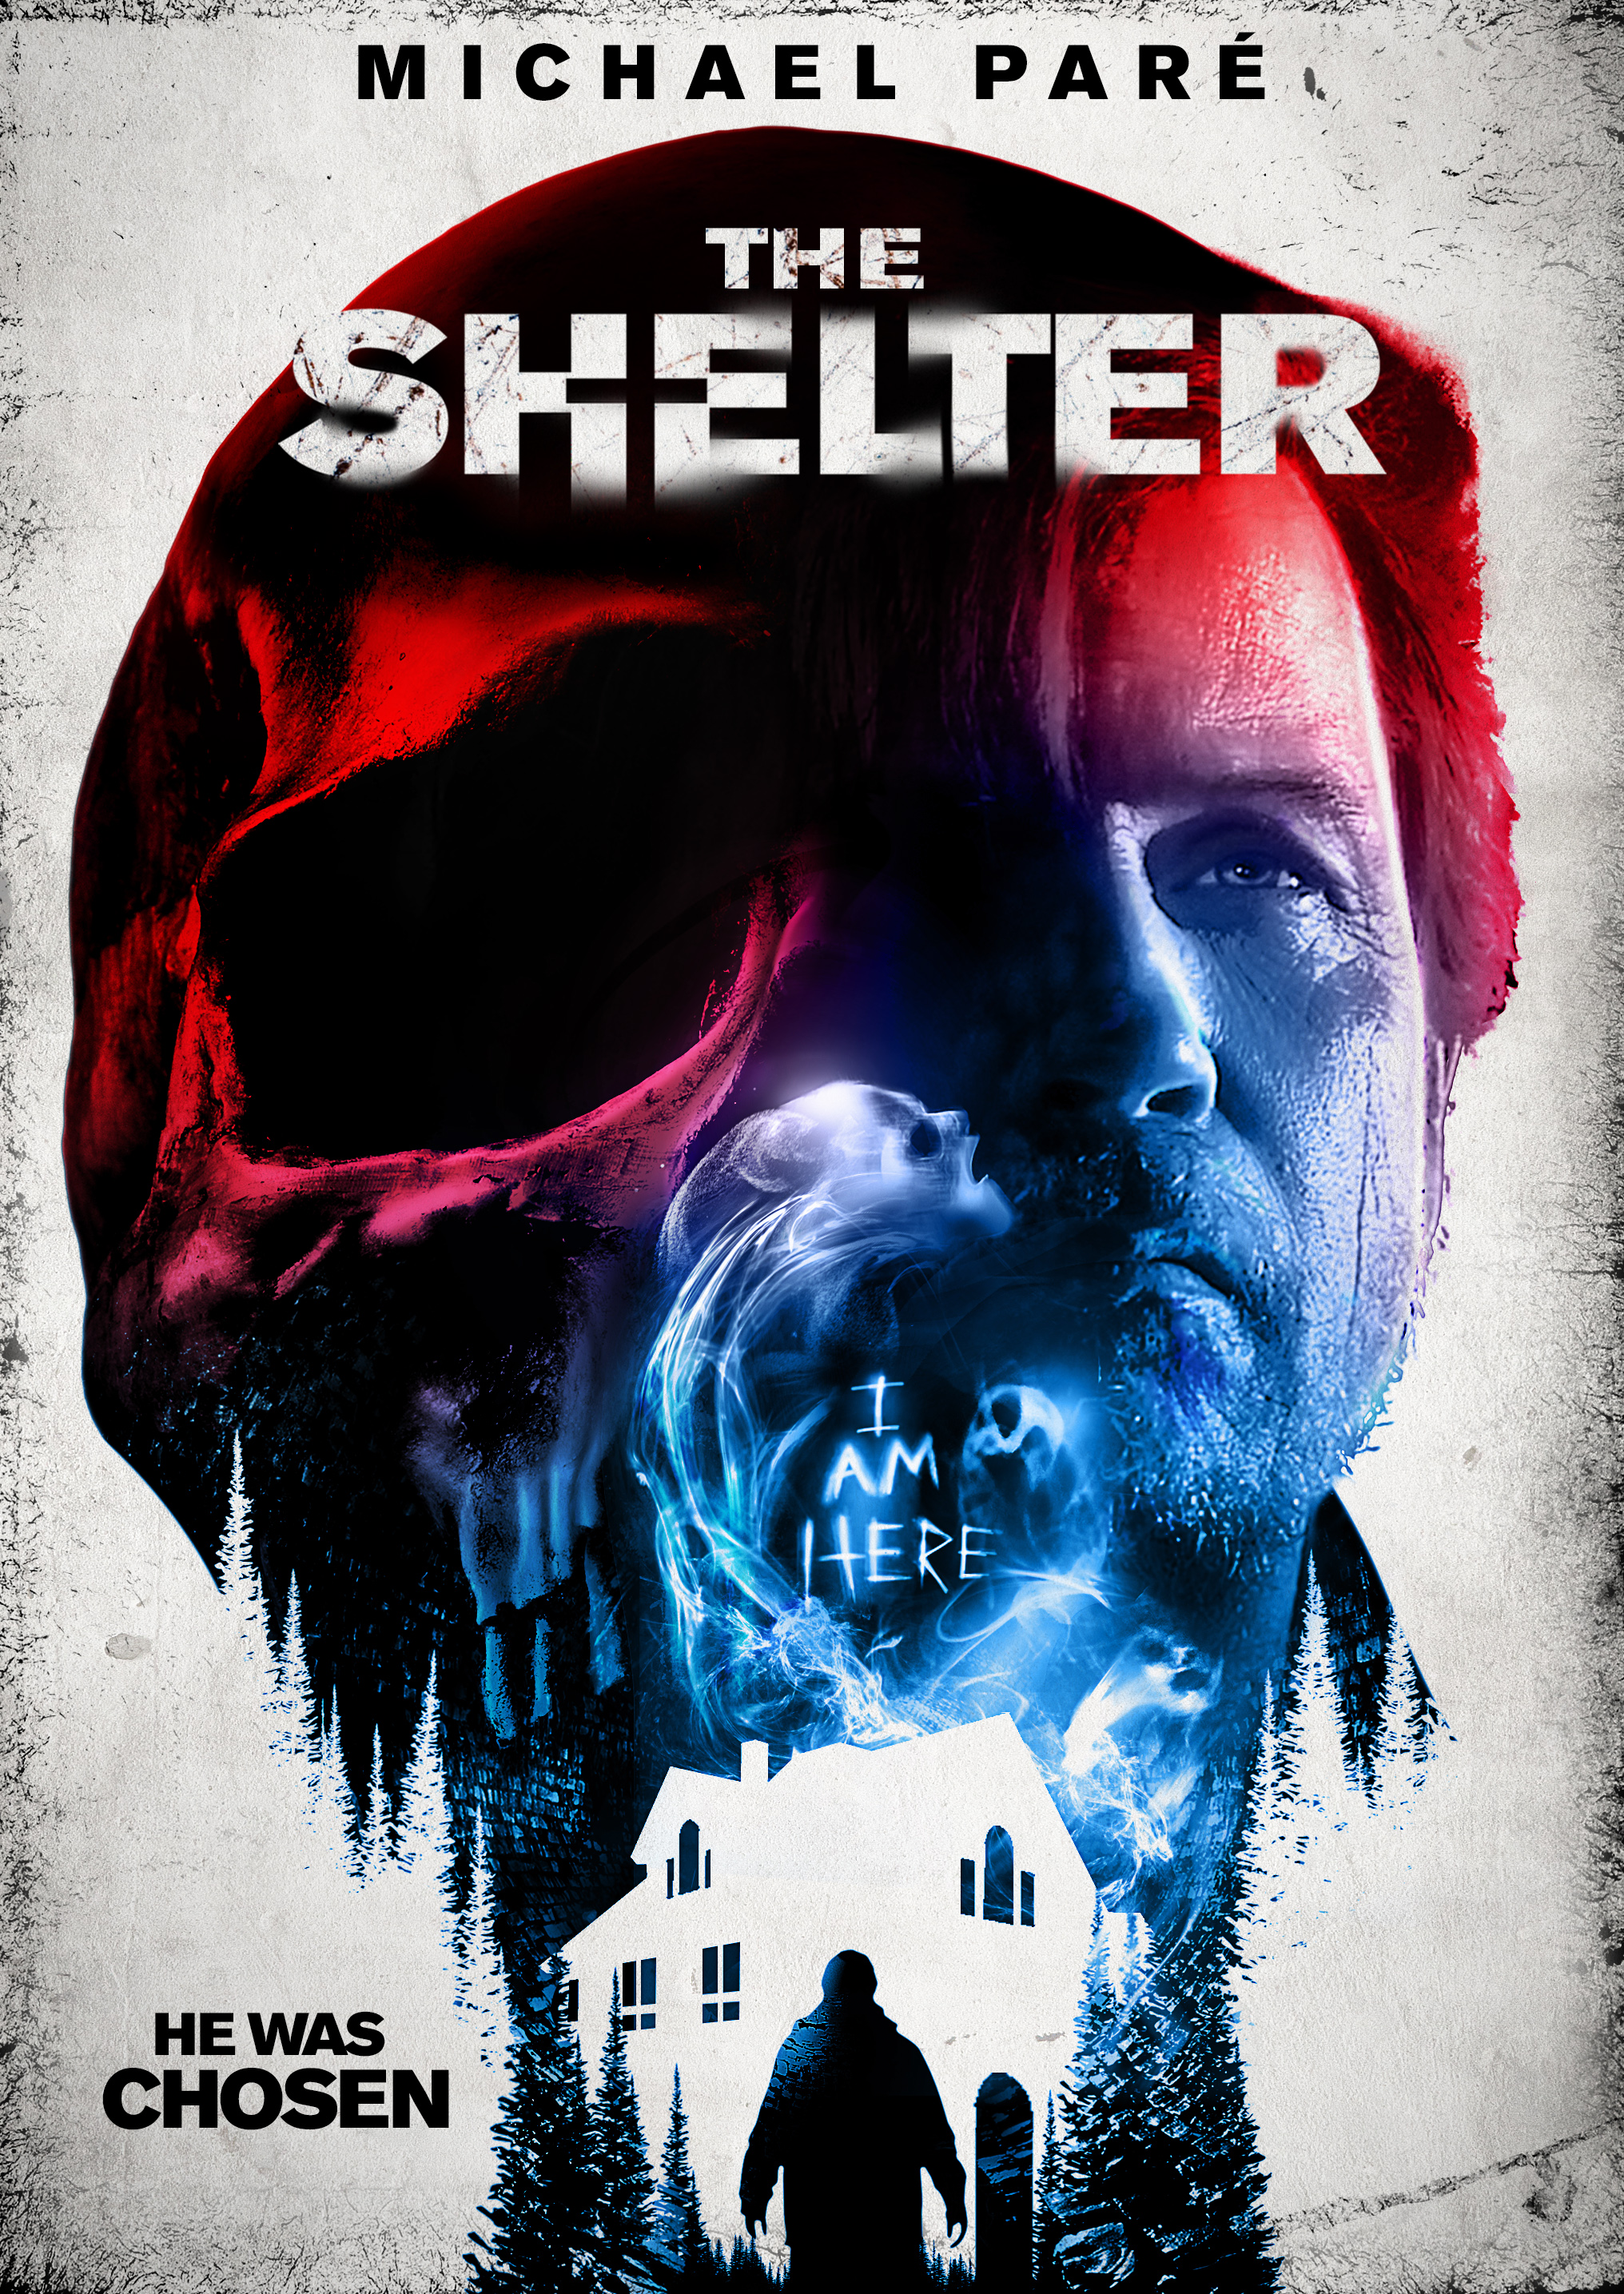 The Shelter' is an Unsettling Amalgam of Horror and Spiritual ...